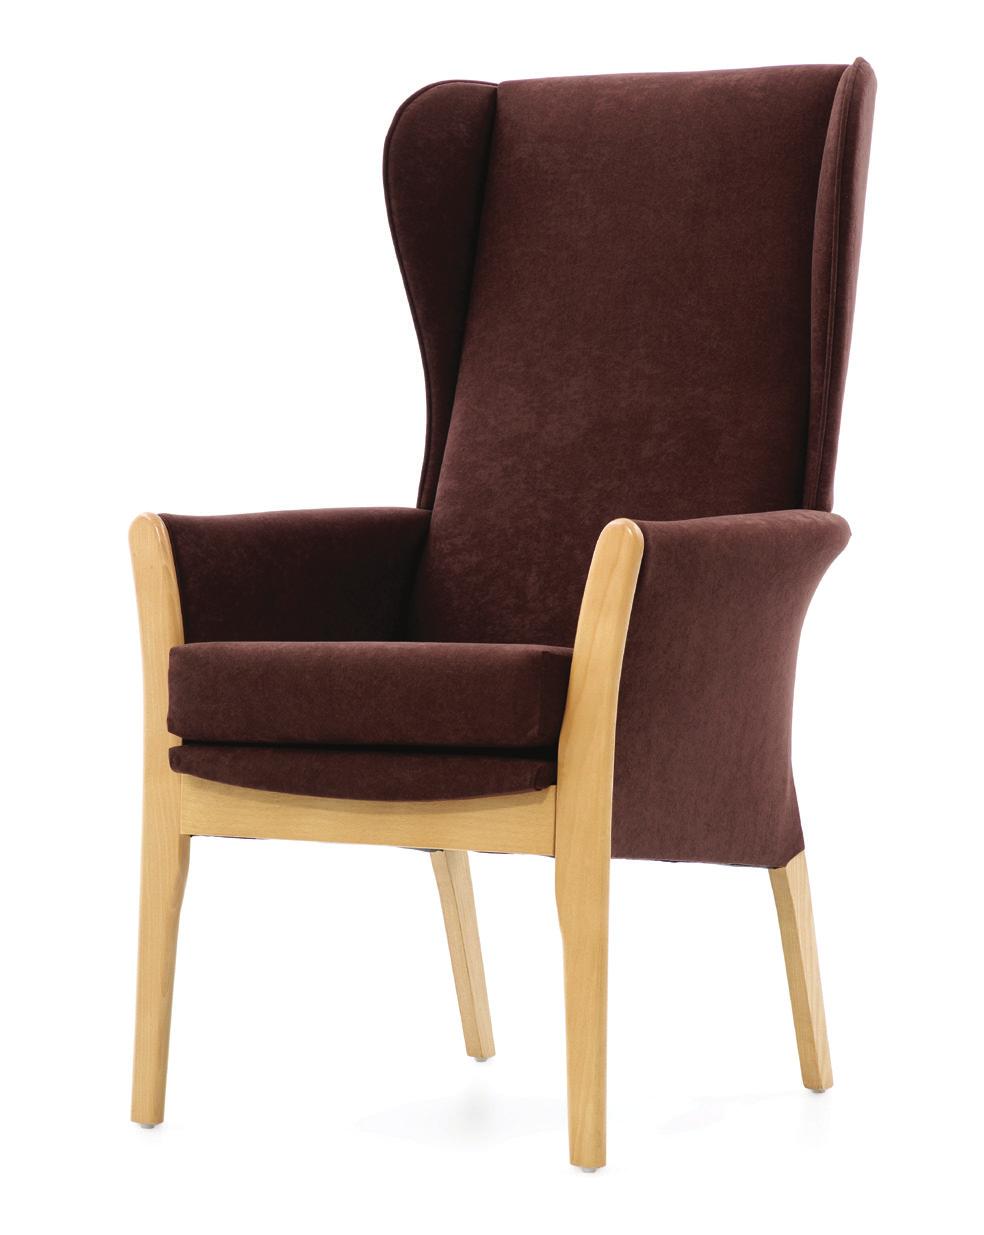 frames Strong and durable wooden design Fire retardant to BS 5852 (Crib 5) Model MC7112 Ashfield Lounge chair h 116cm w 65cm d 73cm sh 51cm A range of colours available A wide choice of vinyl